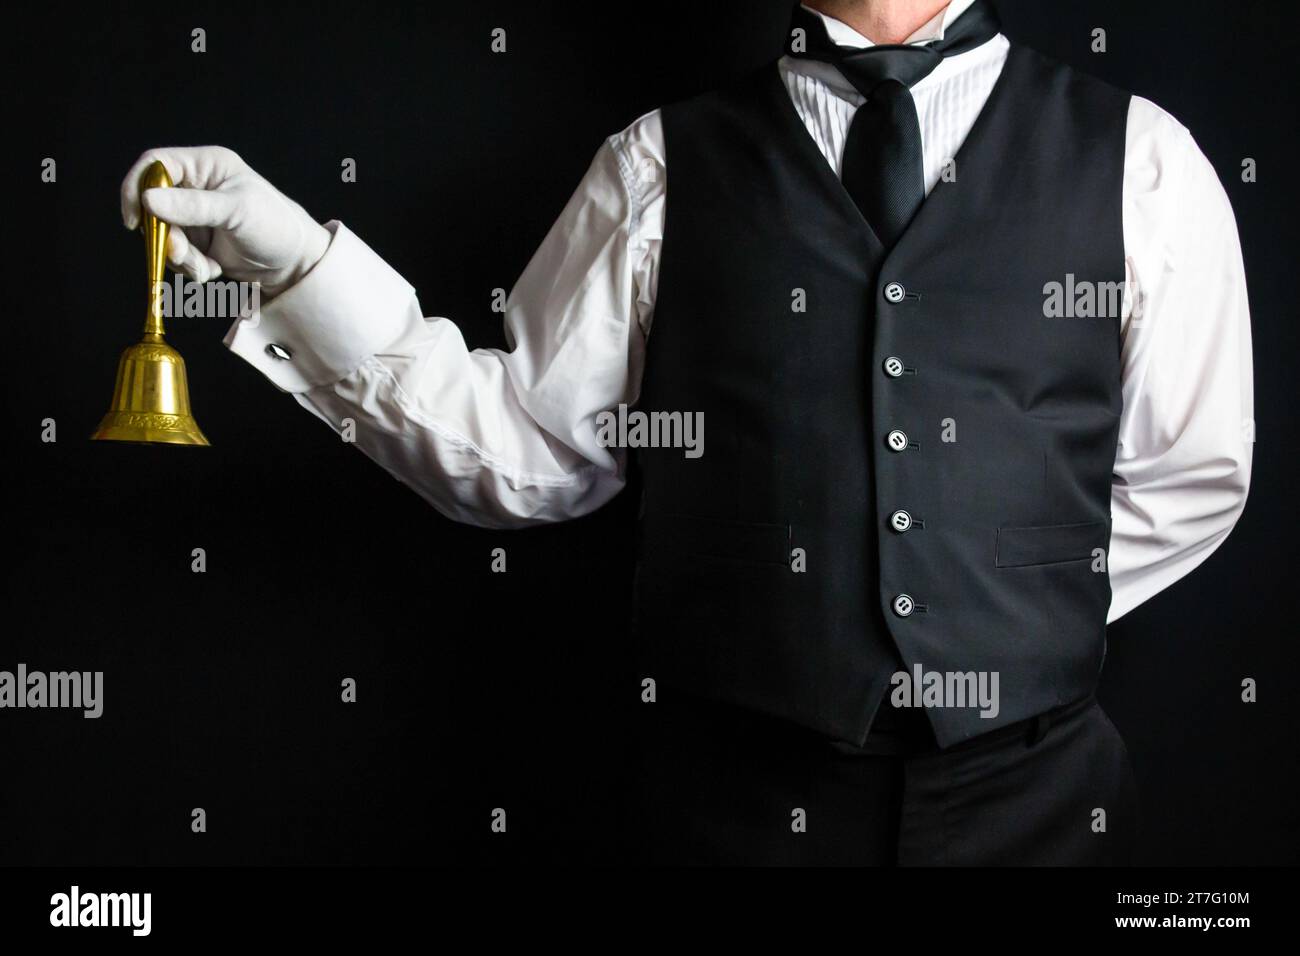 Portrait of Butler or Hotel Concierge Wearing Vest and White Gloves Holding Gold Bell. Concept of Ring for Service. Stock Photo